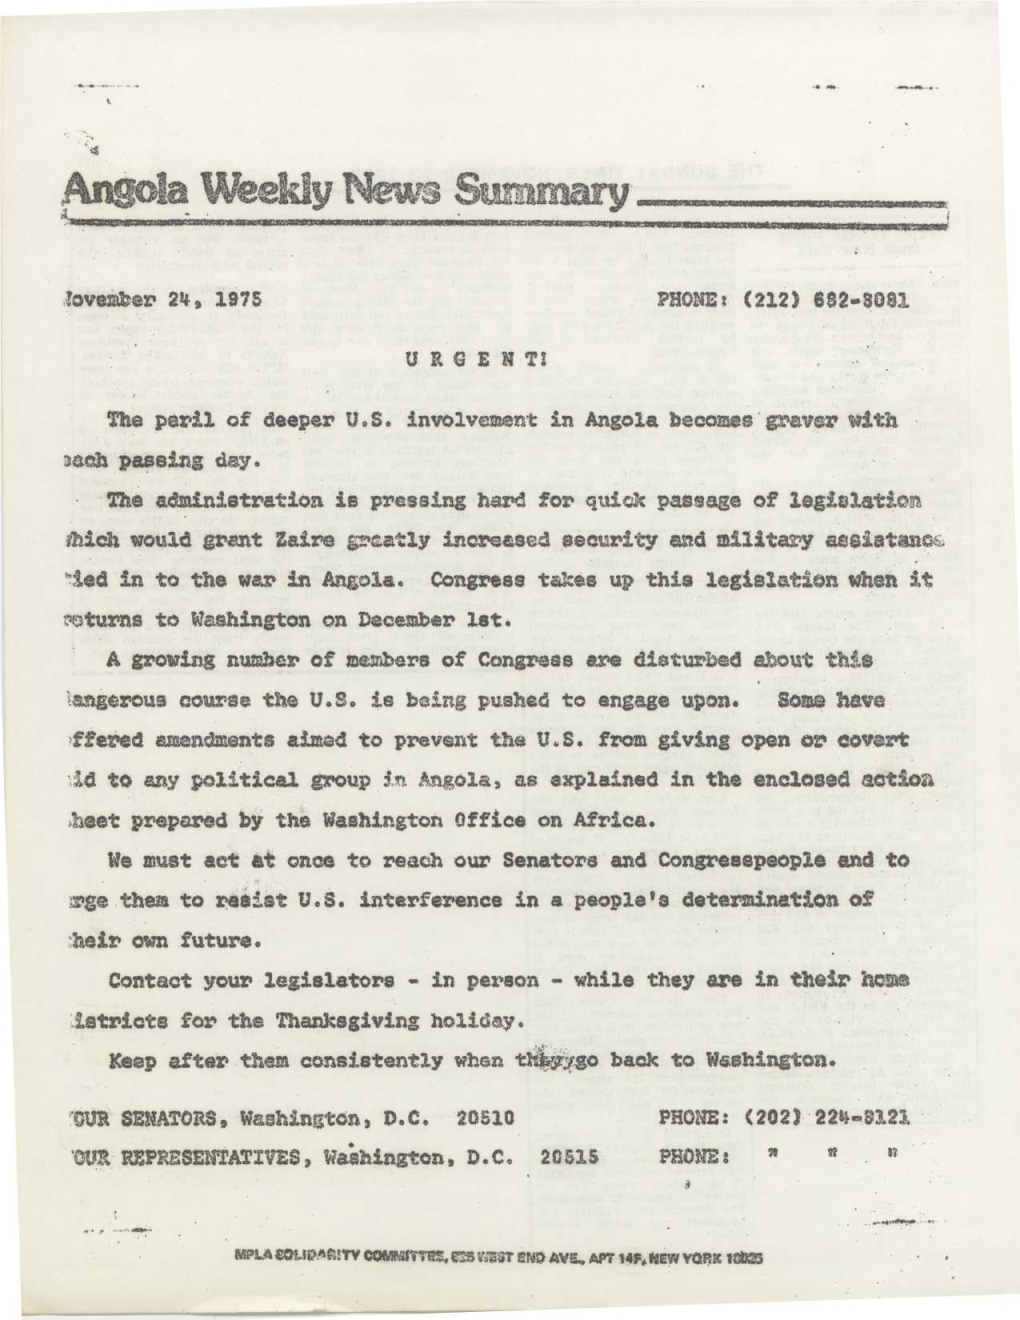 Led in to the War in Angola . Congress Takes up This Legislation When It Mturns to Washington on December 1St